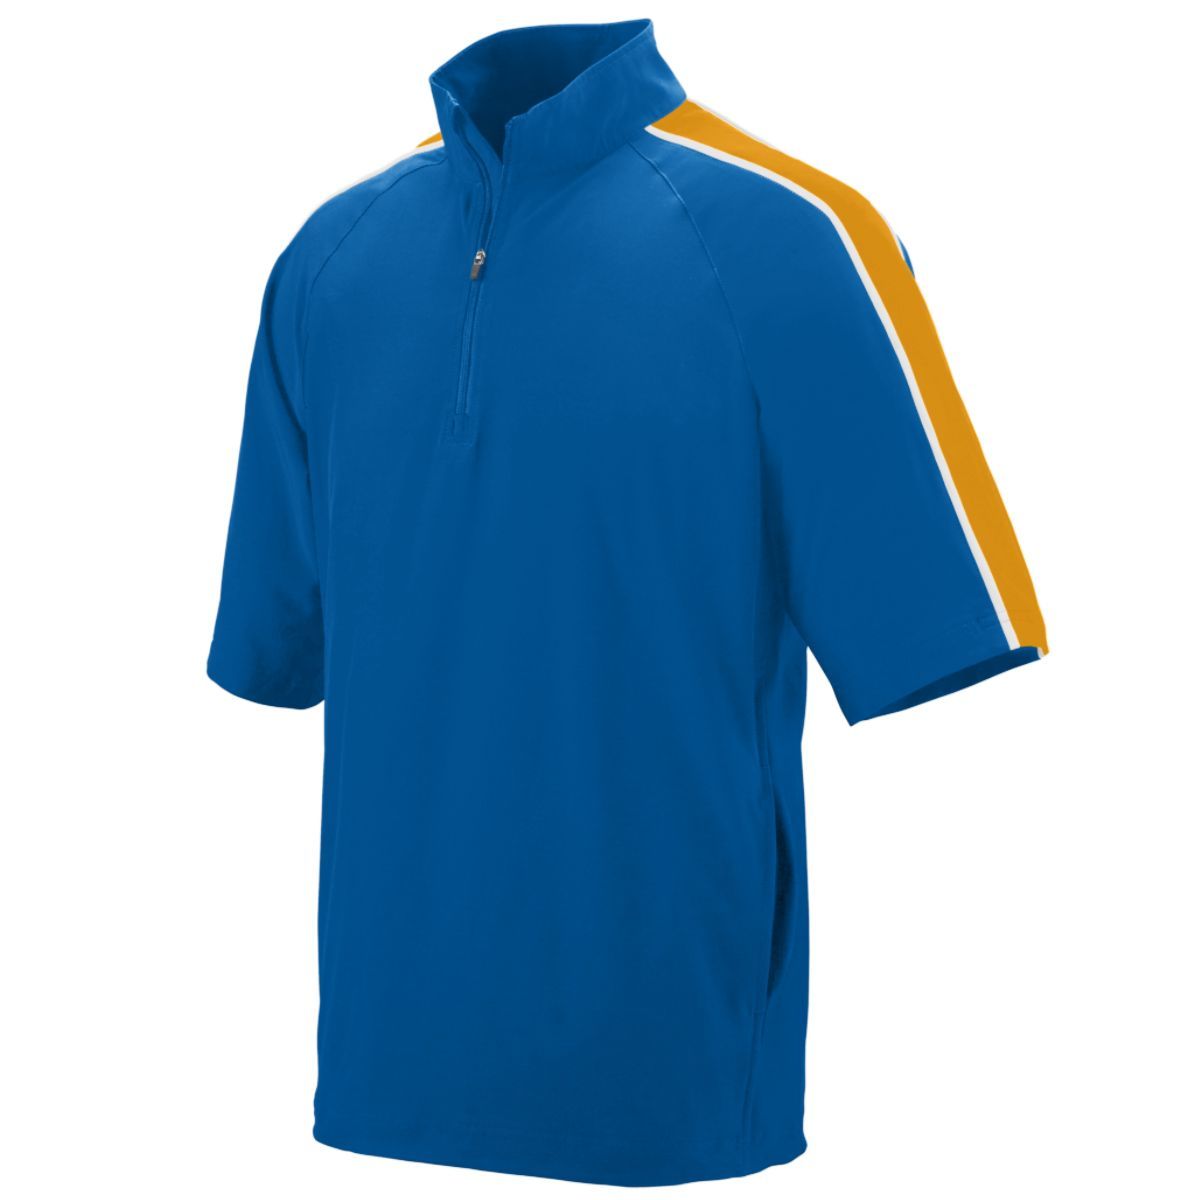 Augusta Sportswear Quantum Short Sleeve Pullover in Royal/Gold/White  -Part of the Adult, Adult-Jacket, Augusta-Products, Outerwear product lines at KanaleyCreations.com